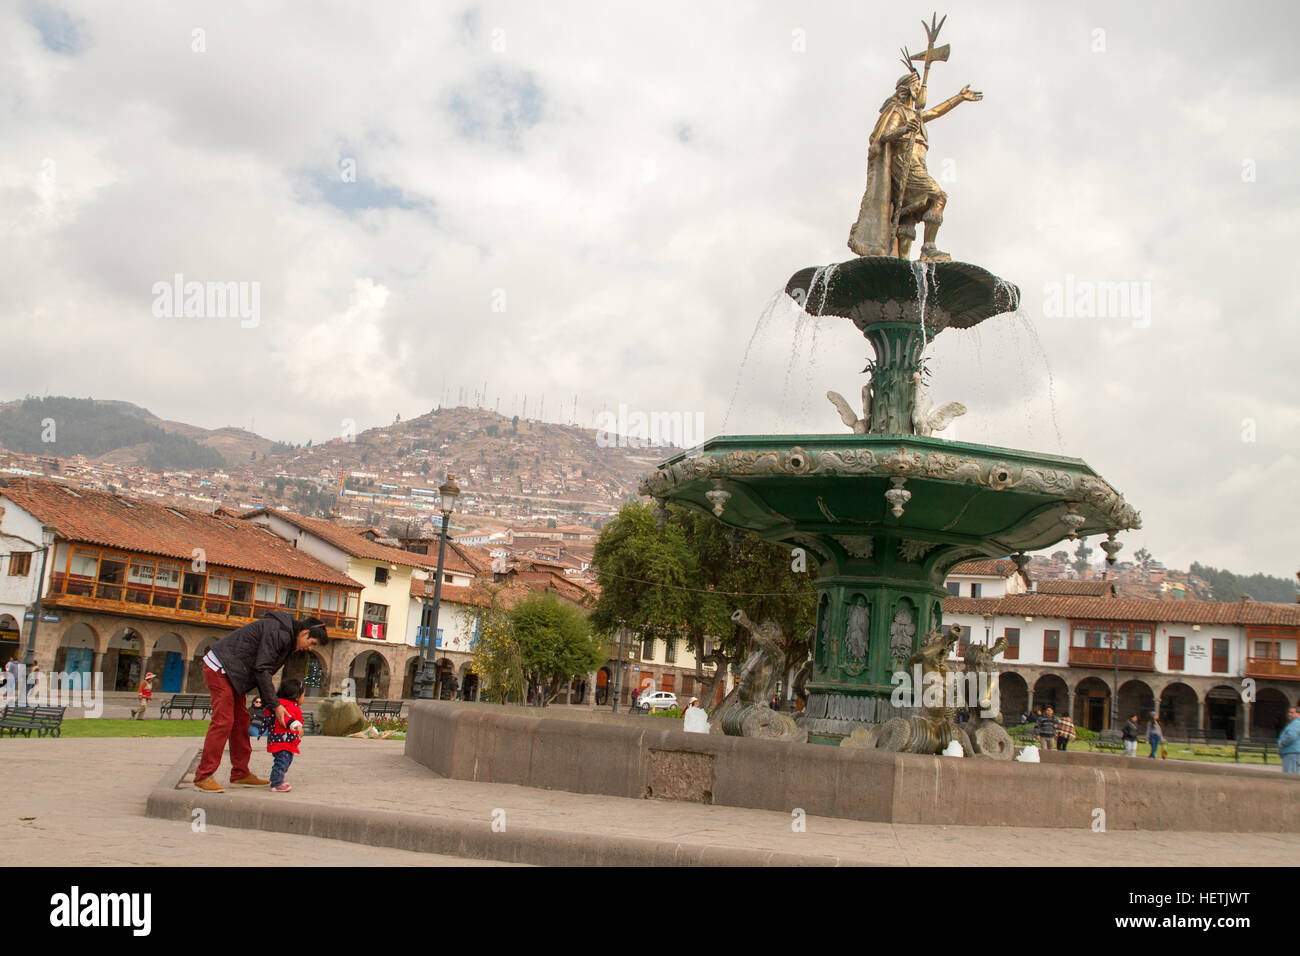 CUSCO - SEPTEMBER 02: Tourists, locals and architecture close-ups on the streets of Cusco, Peru on September 2nd, 2016. Stock Photo